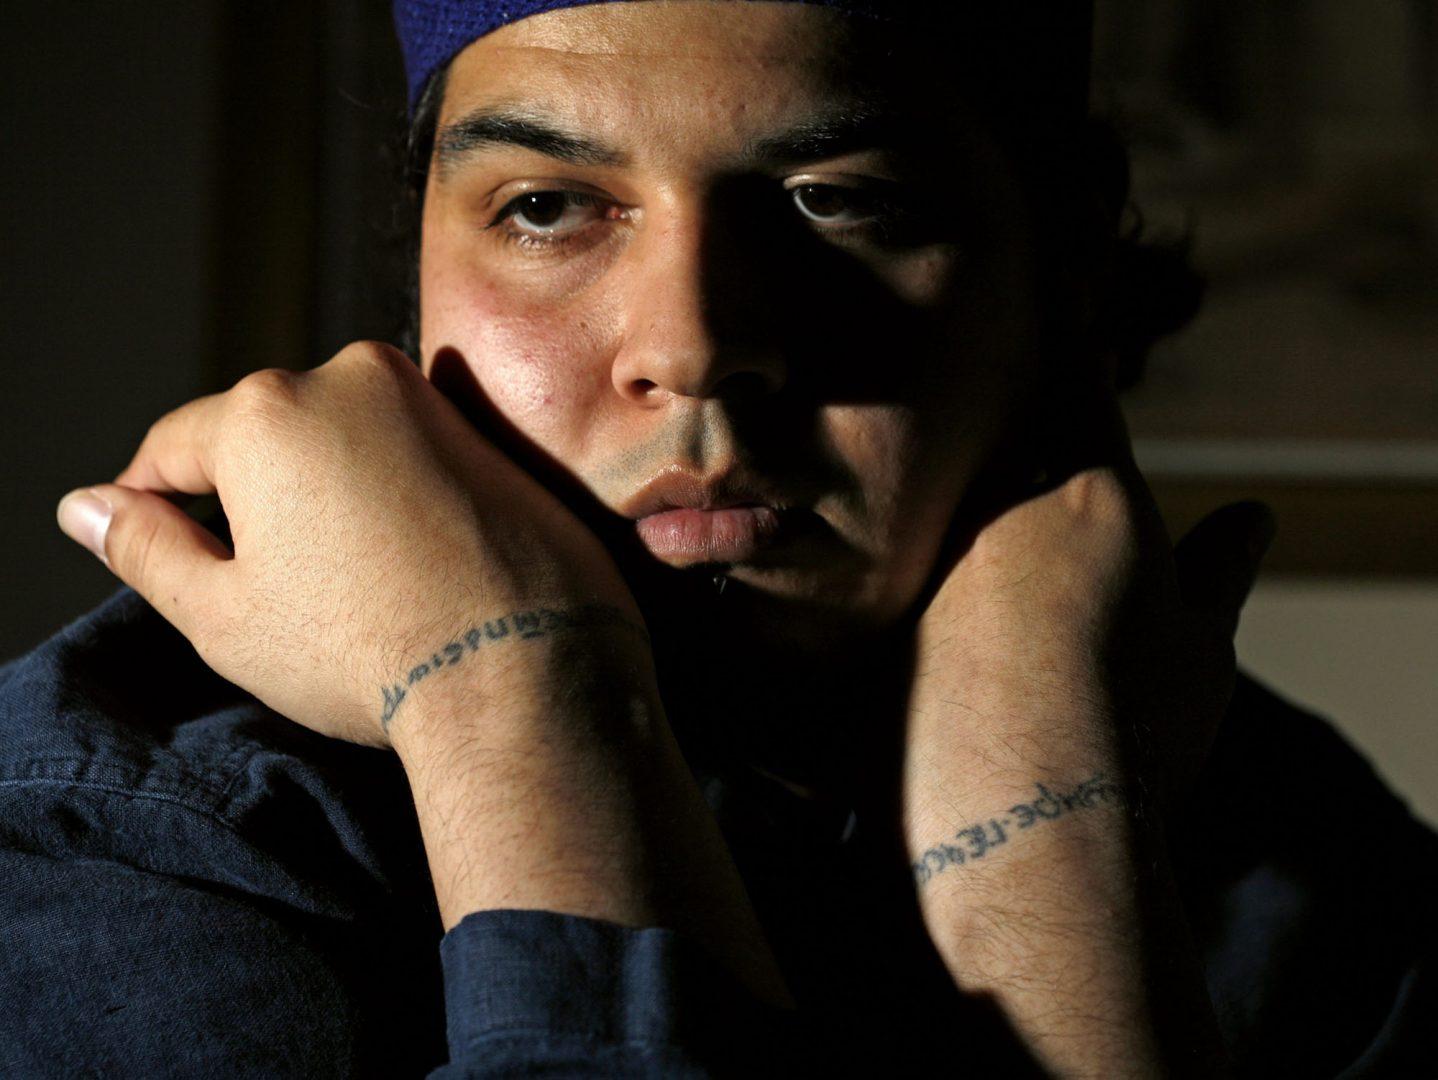 Ameni Rangel, pictured January 26, 2007, says he was fired from Red Robin Restaurant in Bellevue, Washington, after refusing to cover a religious inscription tattooed on his wrists. (Betty Udesen/Seattle Times/MCT)